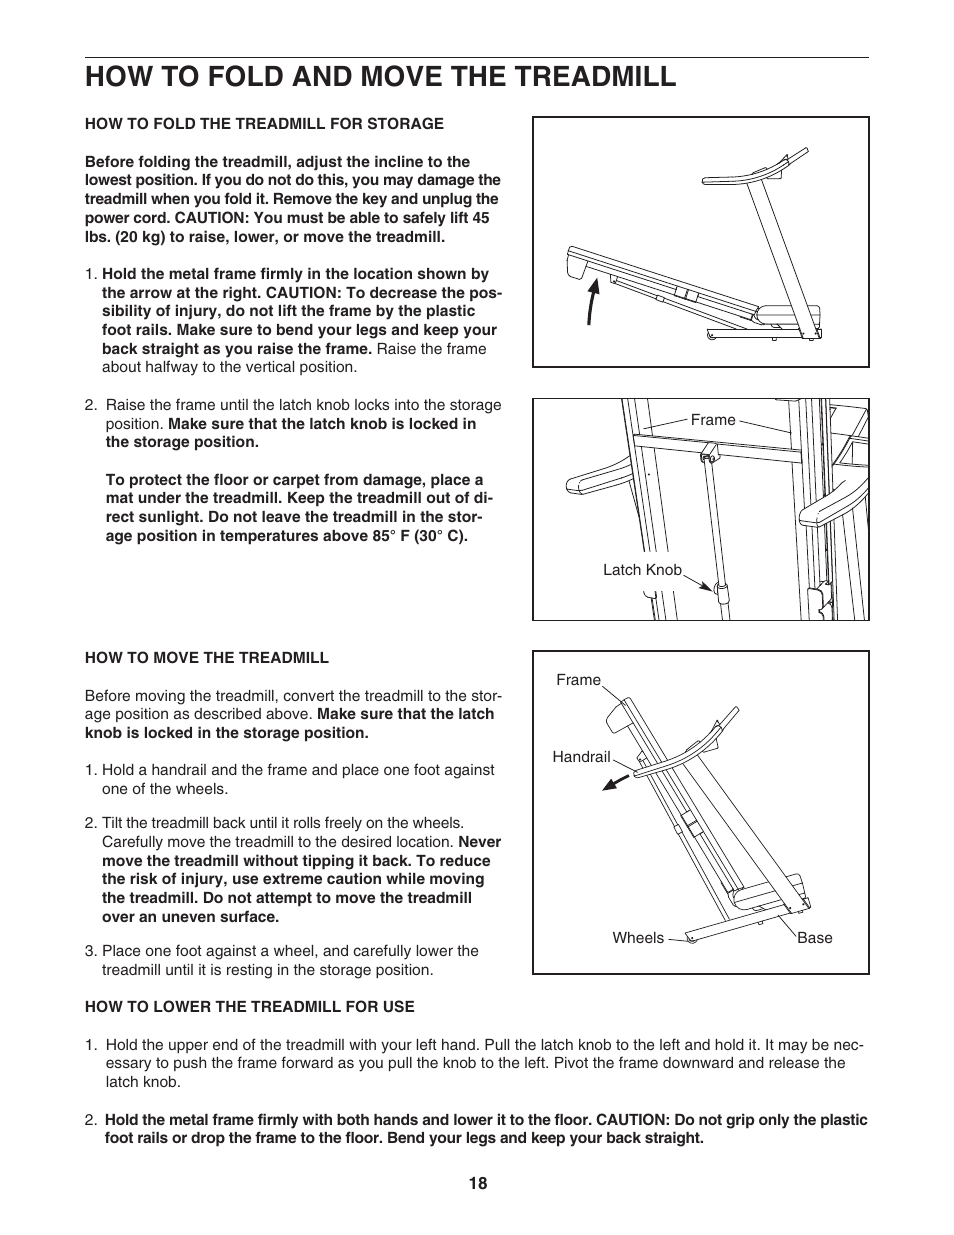 Proform home gyms system 2 (no. 831. 159213) owner's manual.